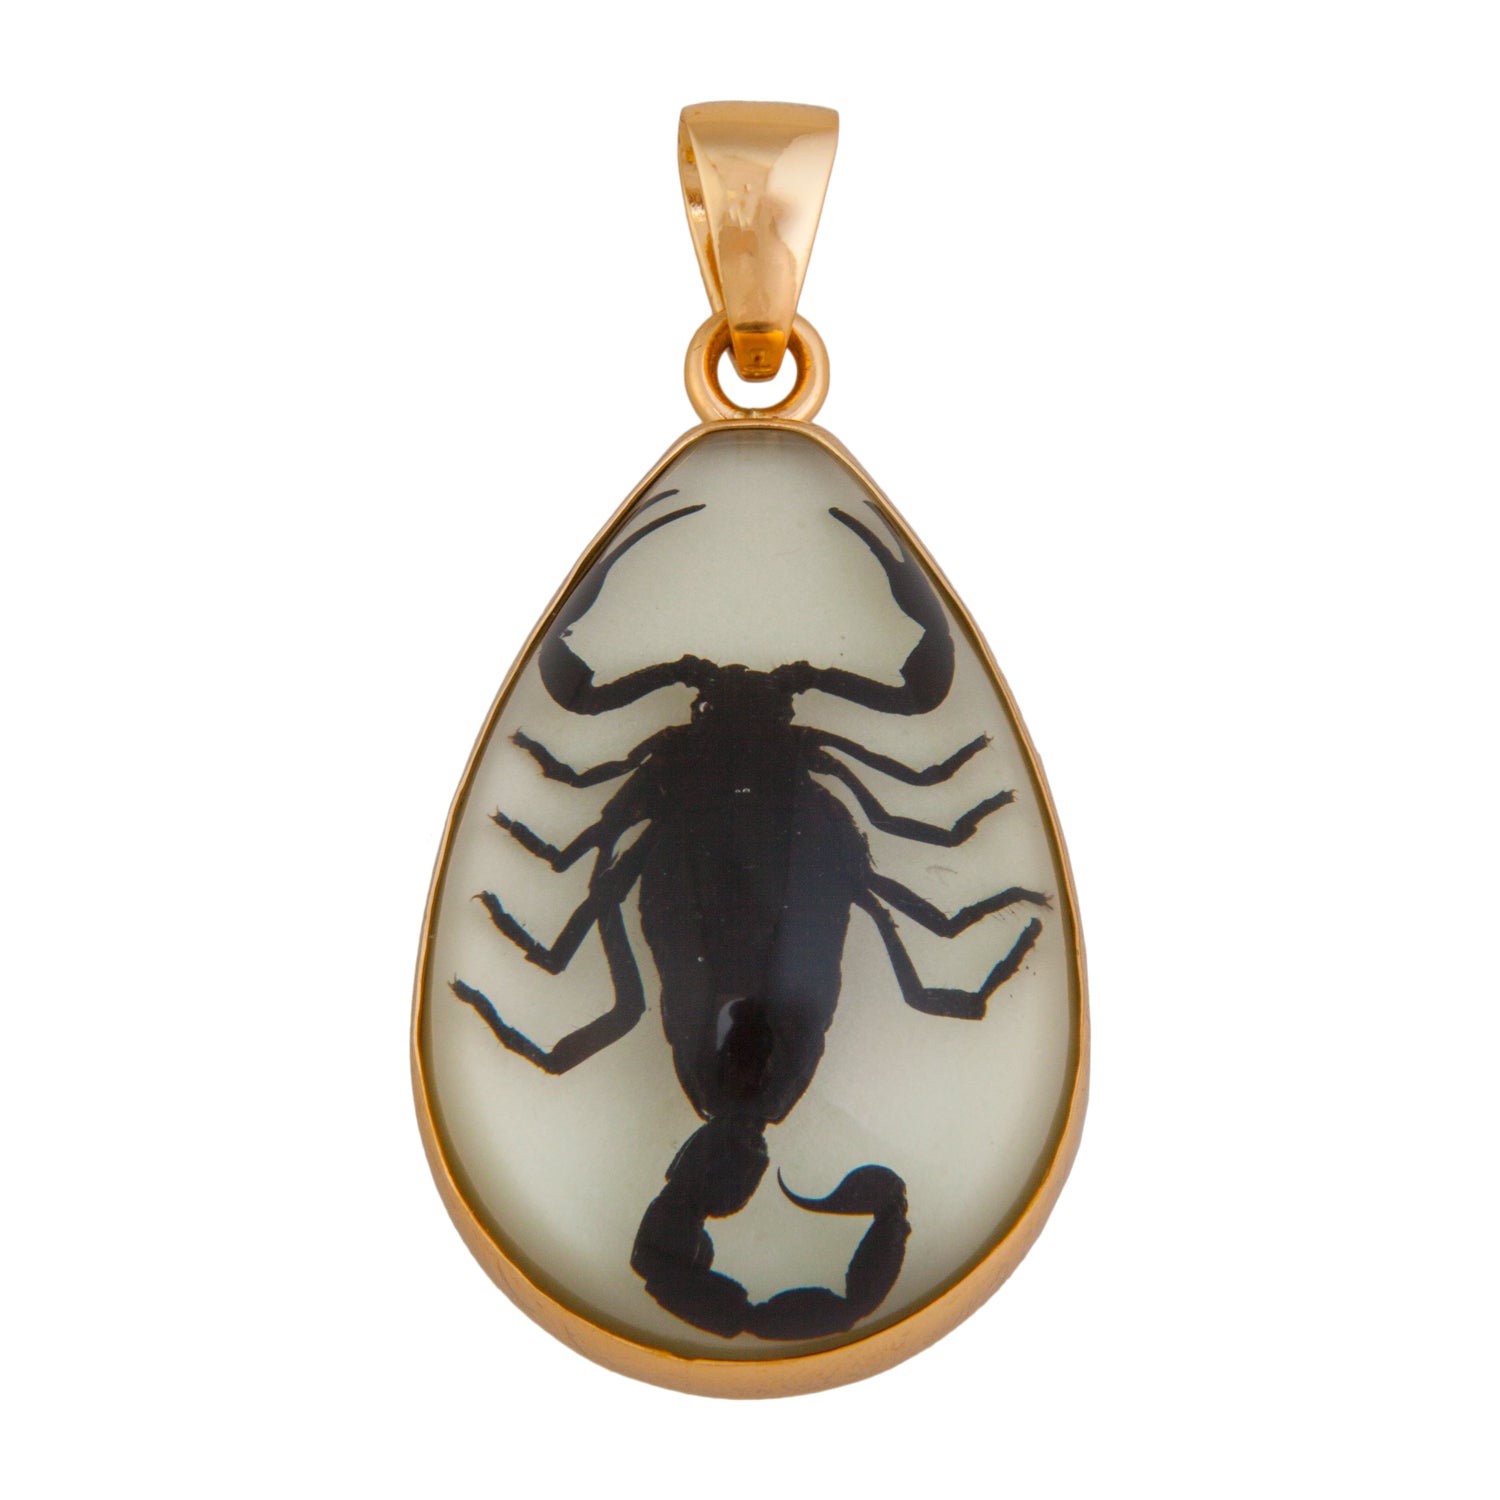 Acrylic necklace with real Scorpion, Chinese golden scorpion - nātür  showroom - Museum quality insects, butterflies and natural history  collectibles, artifacts and gifts